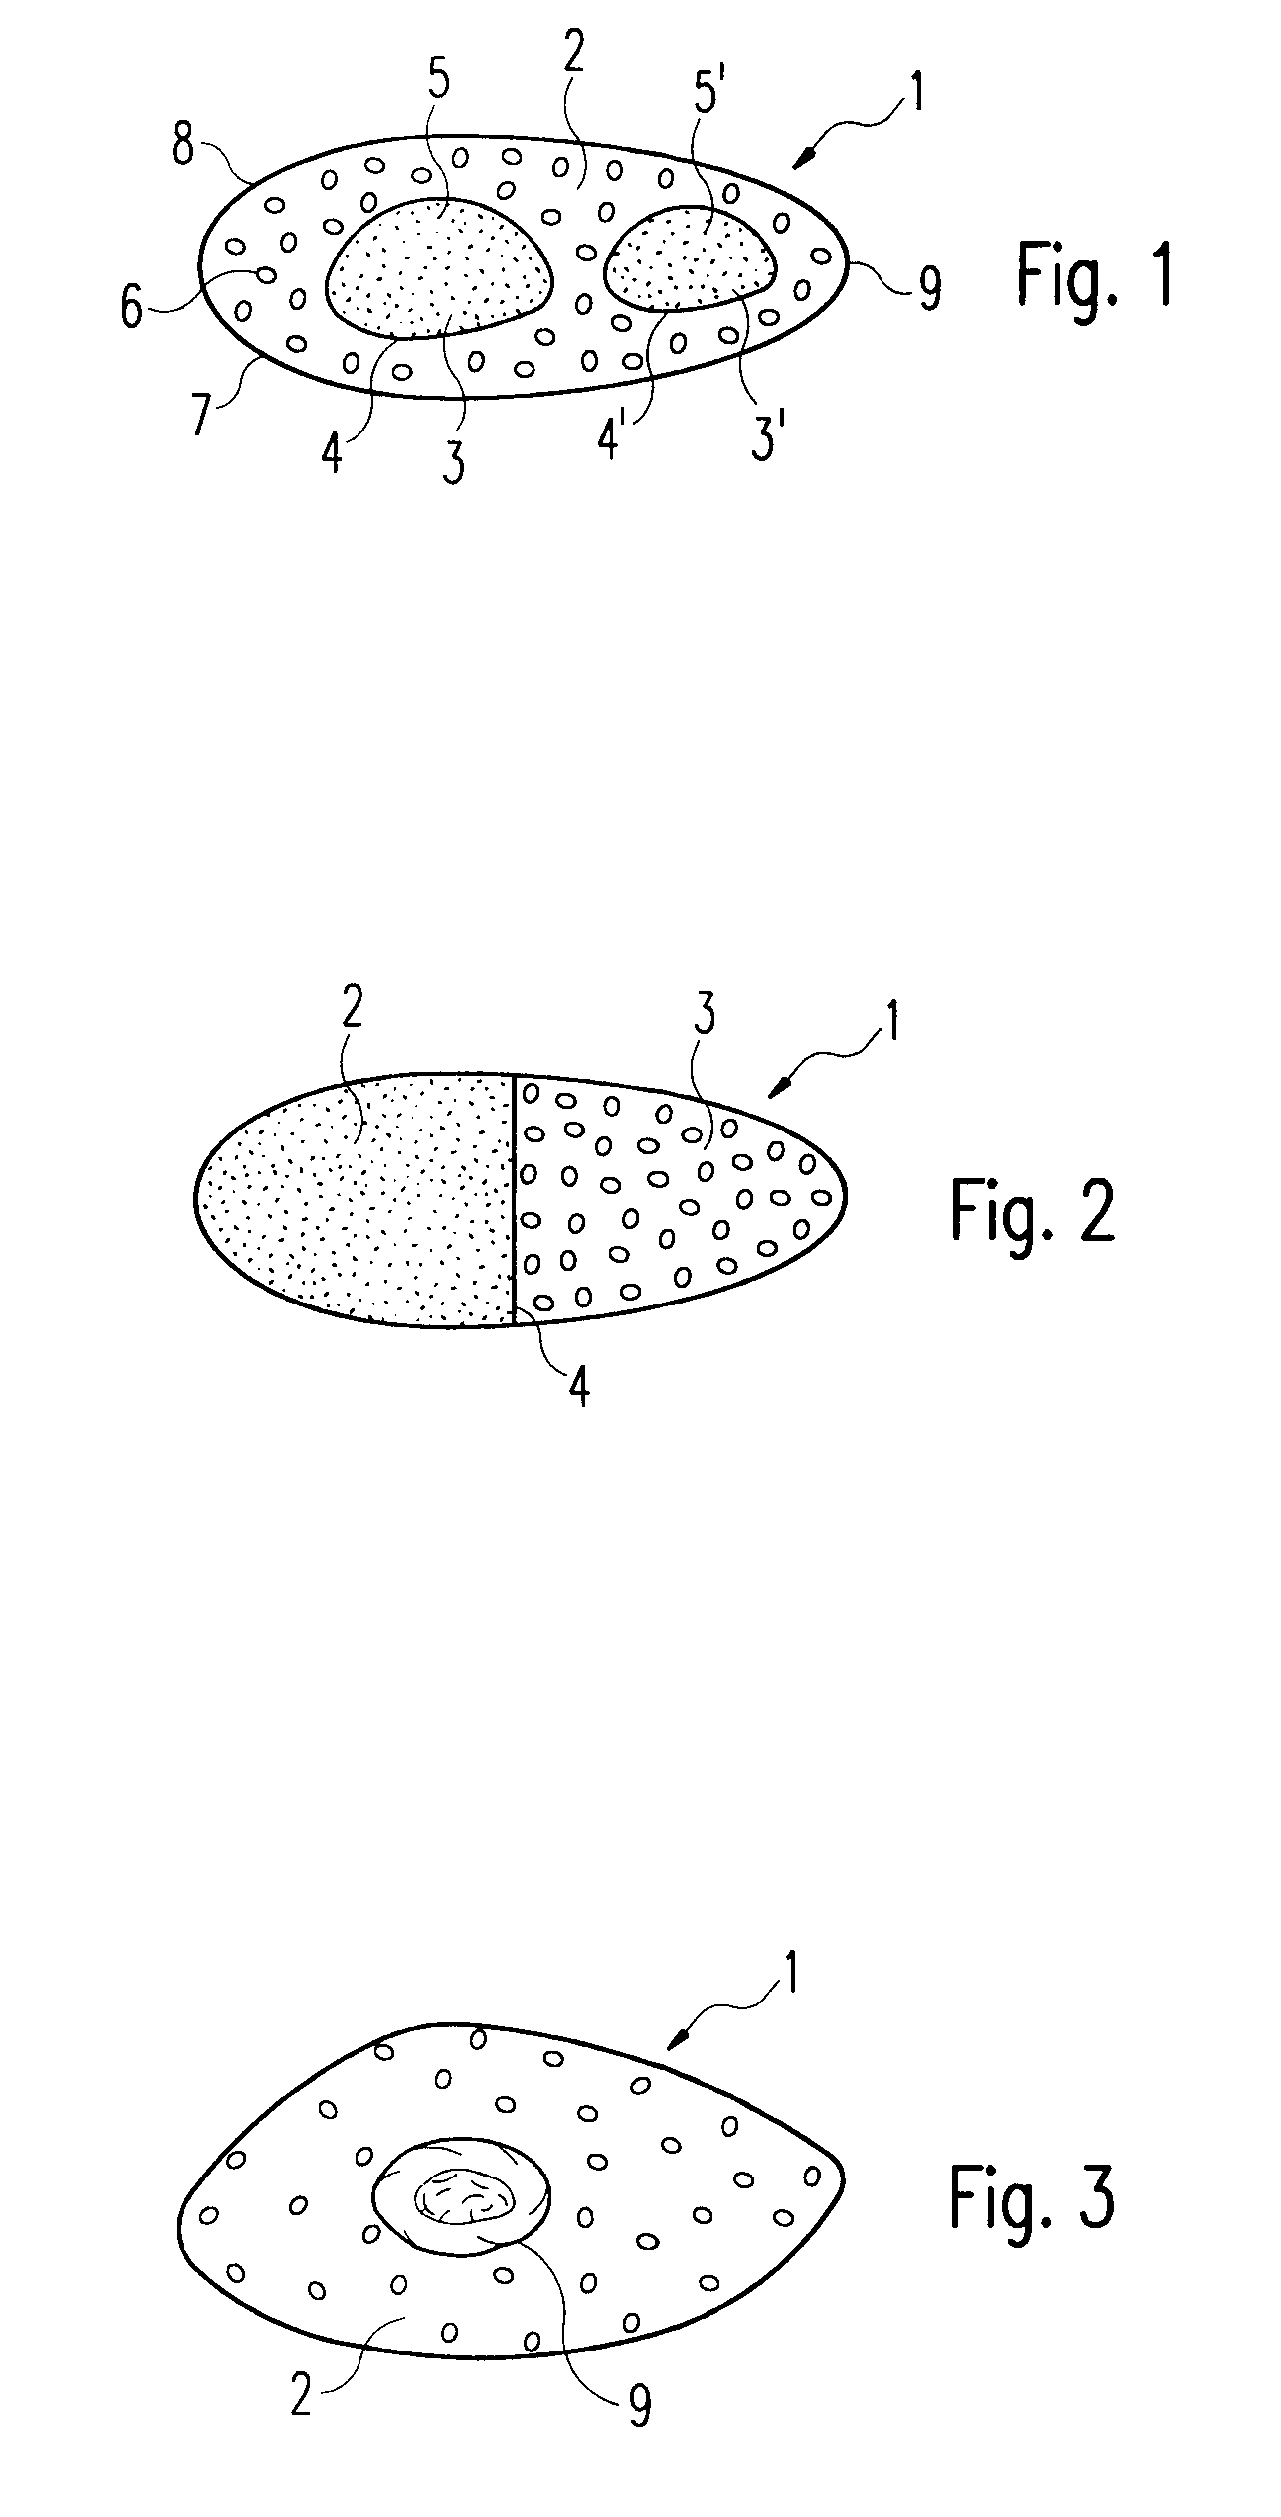 Beverage ingredient containing capsule having several compartments